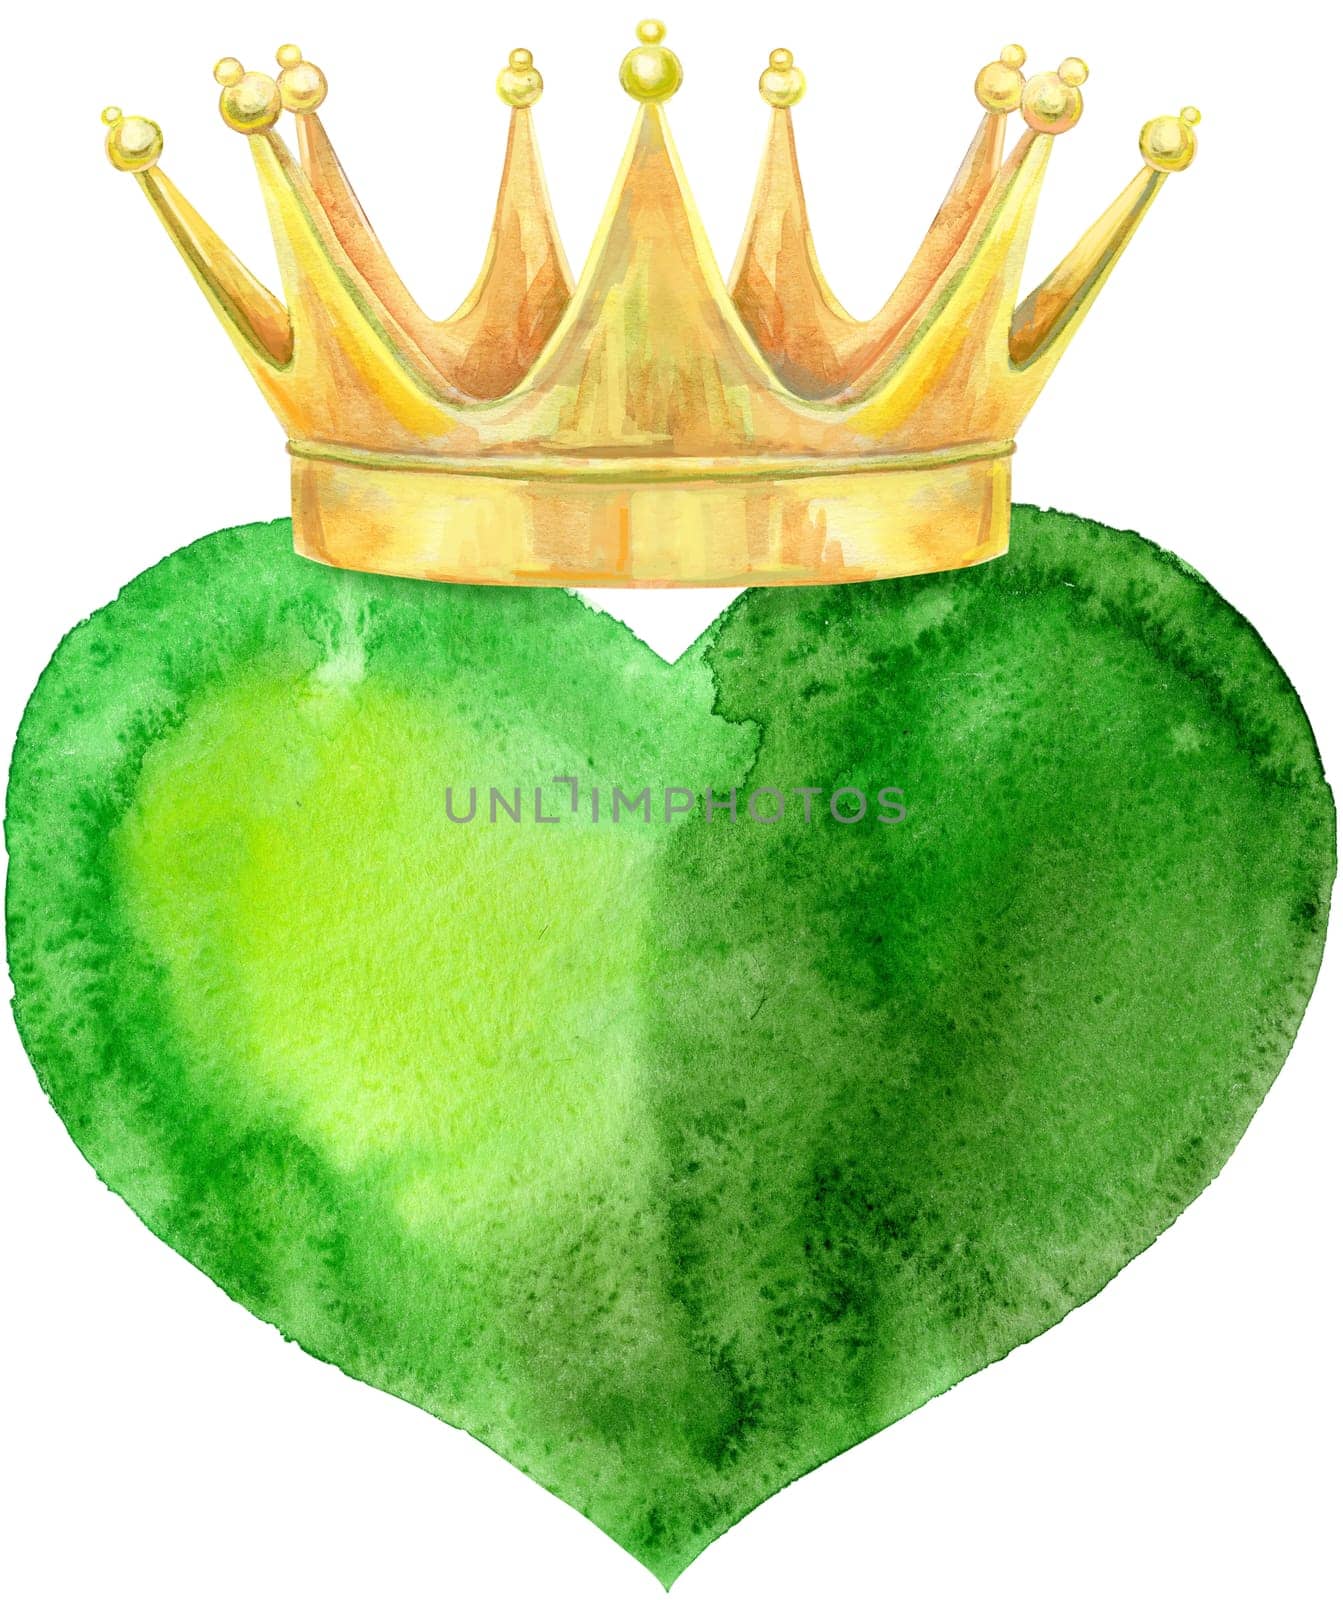 Watercolor green heart with golden crown by NataOmsk